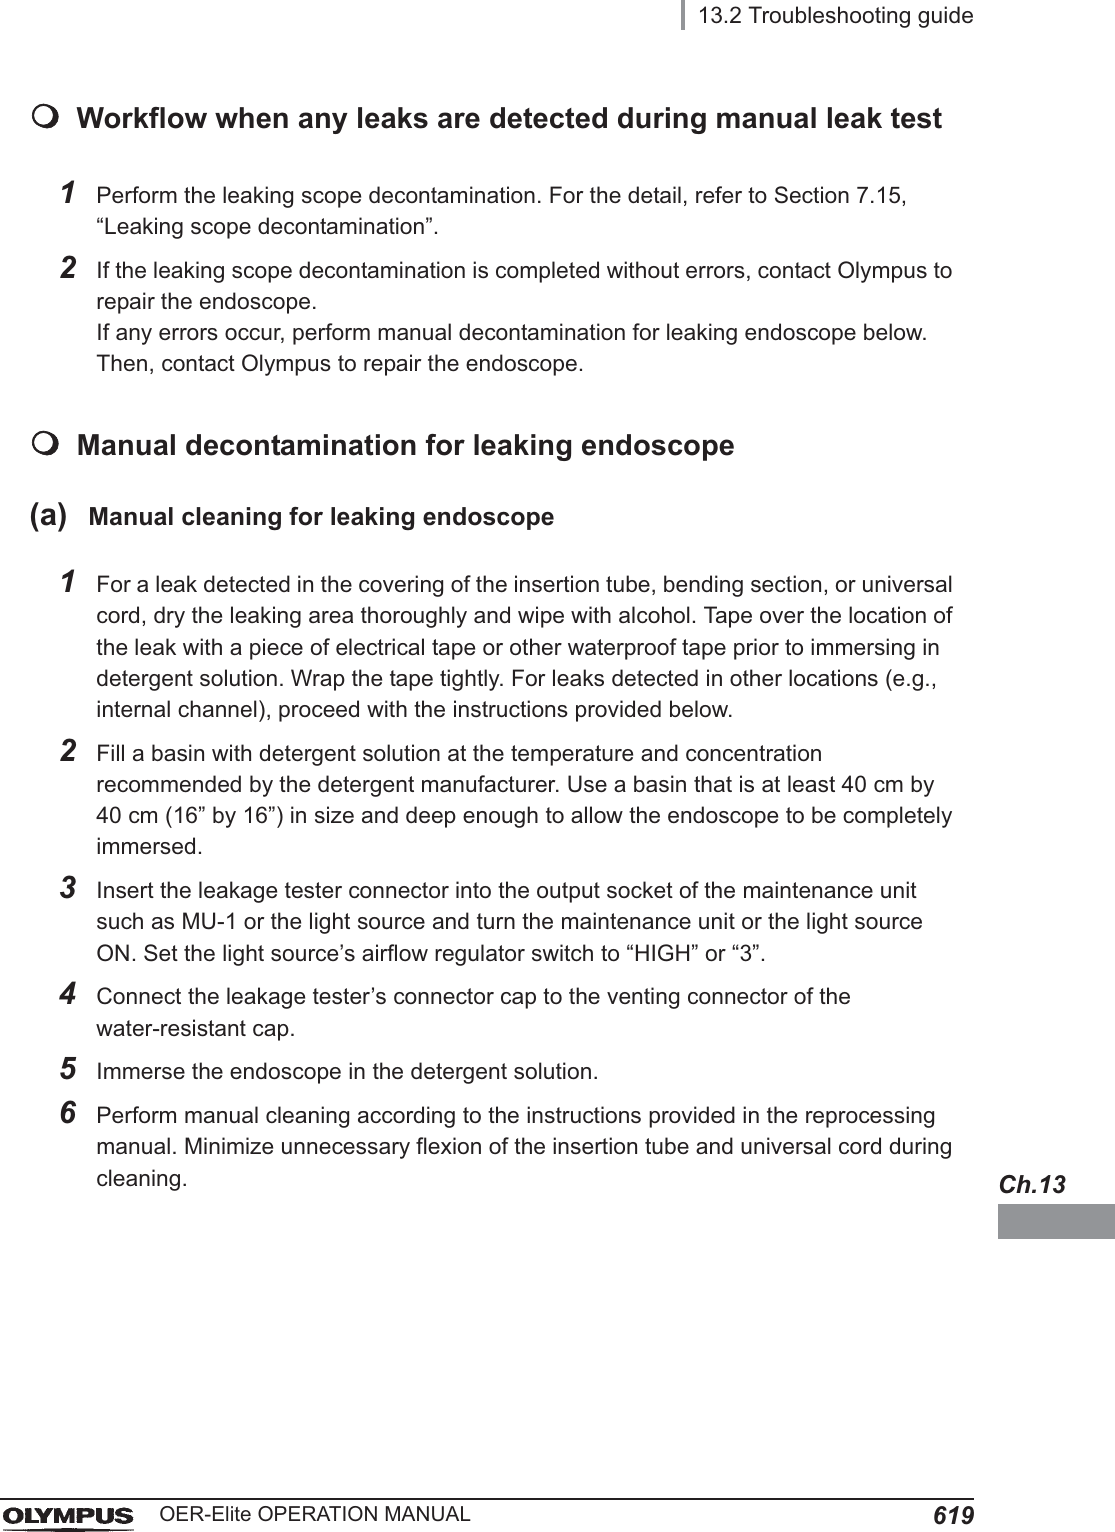 13.2 Troubleshooting guide619OER-Elite OPERATION MANUALCh.13Workflow when any leaks are detected during manual leak testManual decontamination for leaking endoscope(a) Manual cleaning for leaking endoscope1Perform the leaking scope decontamination. For the detail, refer to Section 7.15, “Leaking scope decontamination”.2If the leaking scope decontamination is completed without errors, contact Olympus to repair the endoscope.If any errors occur, perform manual decontamination for leaking endoscope below. Then, contact Olympus to repair the endoscope.1For a leak detected in the covering of the insertion tube, bending section, or universal cord, dry the leaking area thoroughly and wipe with alcohol. Tape over the location of the leak with a piece of electrical tape or other waterproof tape prior to immersing in detergent solution. Wrap the tape tightly. For leaks detected in other locations (e.g., internal channel), proceed with the instructions provided below.2Fill a basin with detergent solution at the temperature and concentration recommended by the detergent manufacturer. Use a basin that is at least 40 cm by 40 cm (16” by 16”) in size and deep enough to allow the endoscope to be completely immersed.3Insert the leakage tester connector into the output socket of the maintenance unit such as MU-1 or the light source and turn the maintenance unit or the light source ON. Set the light source’s airflow regulator switch to “HIGH” or “3”.4Connect the leakage tester’s connector cap to the venting connector of the water-resistant cap. 5Immerse the endoscope in the detergent solution.6Perform manual cleaning according to the instructions provided in the reprocessing manual. Minimize unnecessary flexion of the insertion tube and universal cord during cleaning.